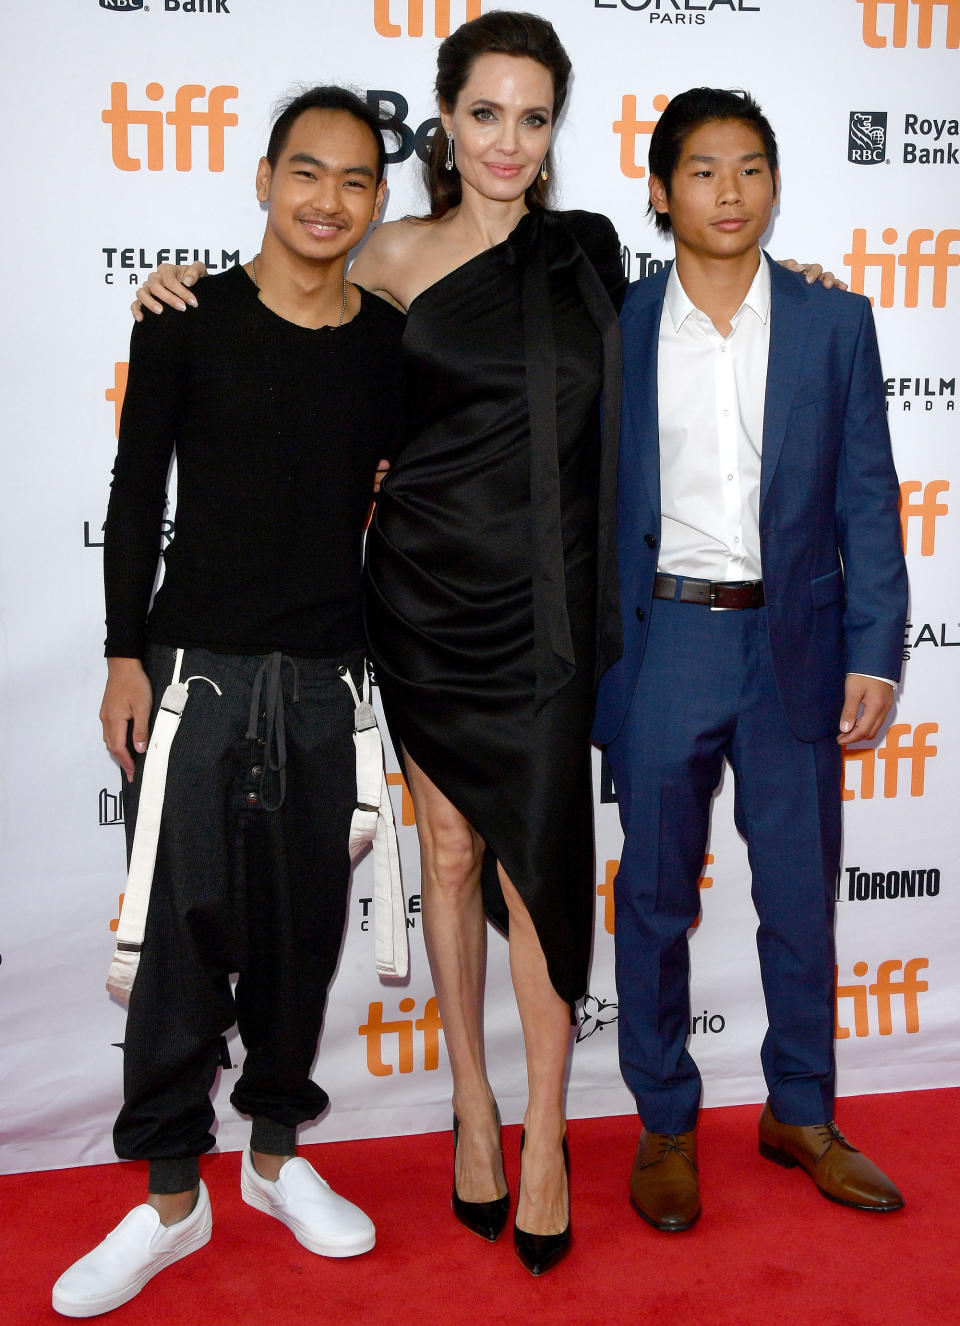 <p>Thanks to their special behind-the-scenes status, Jolie's older sons got a special red carpet pic with Mom, too! “They worked hard,” <span>Jolie told <em>ET</em></span> of her two oldest kids.</p>